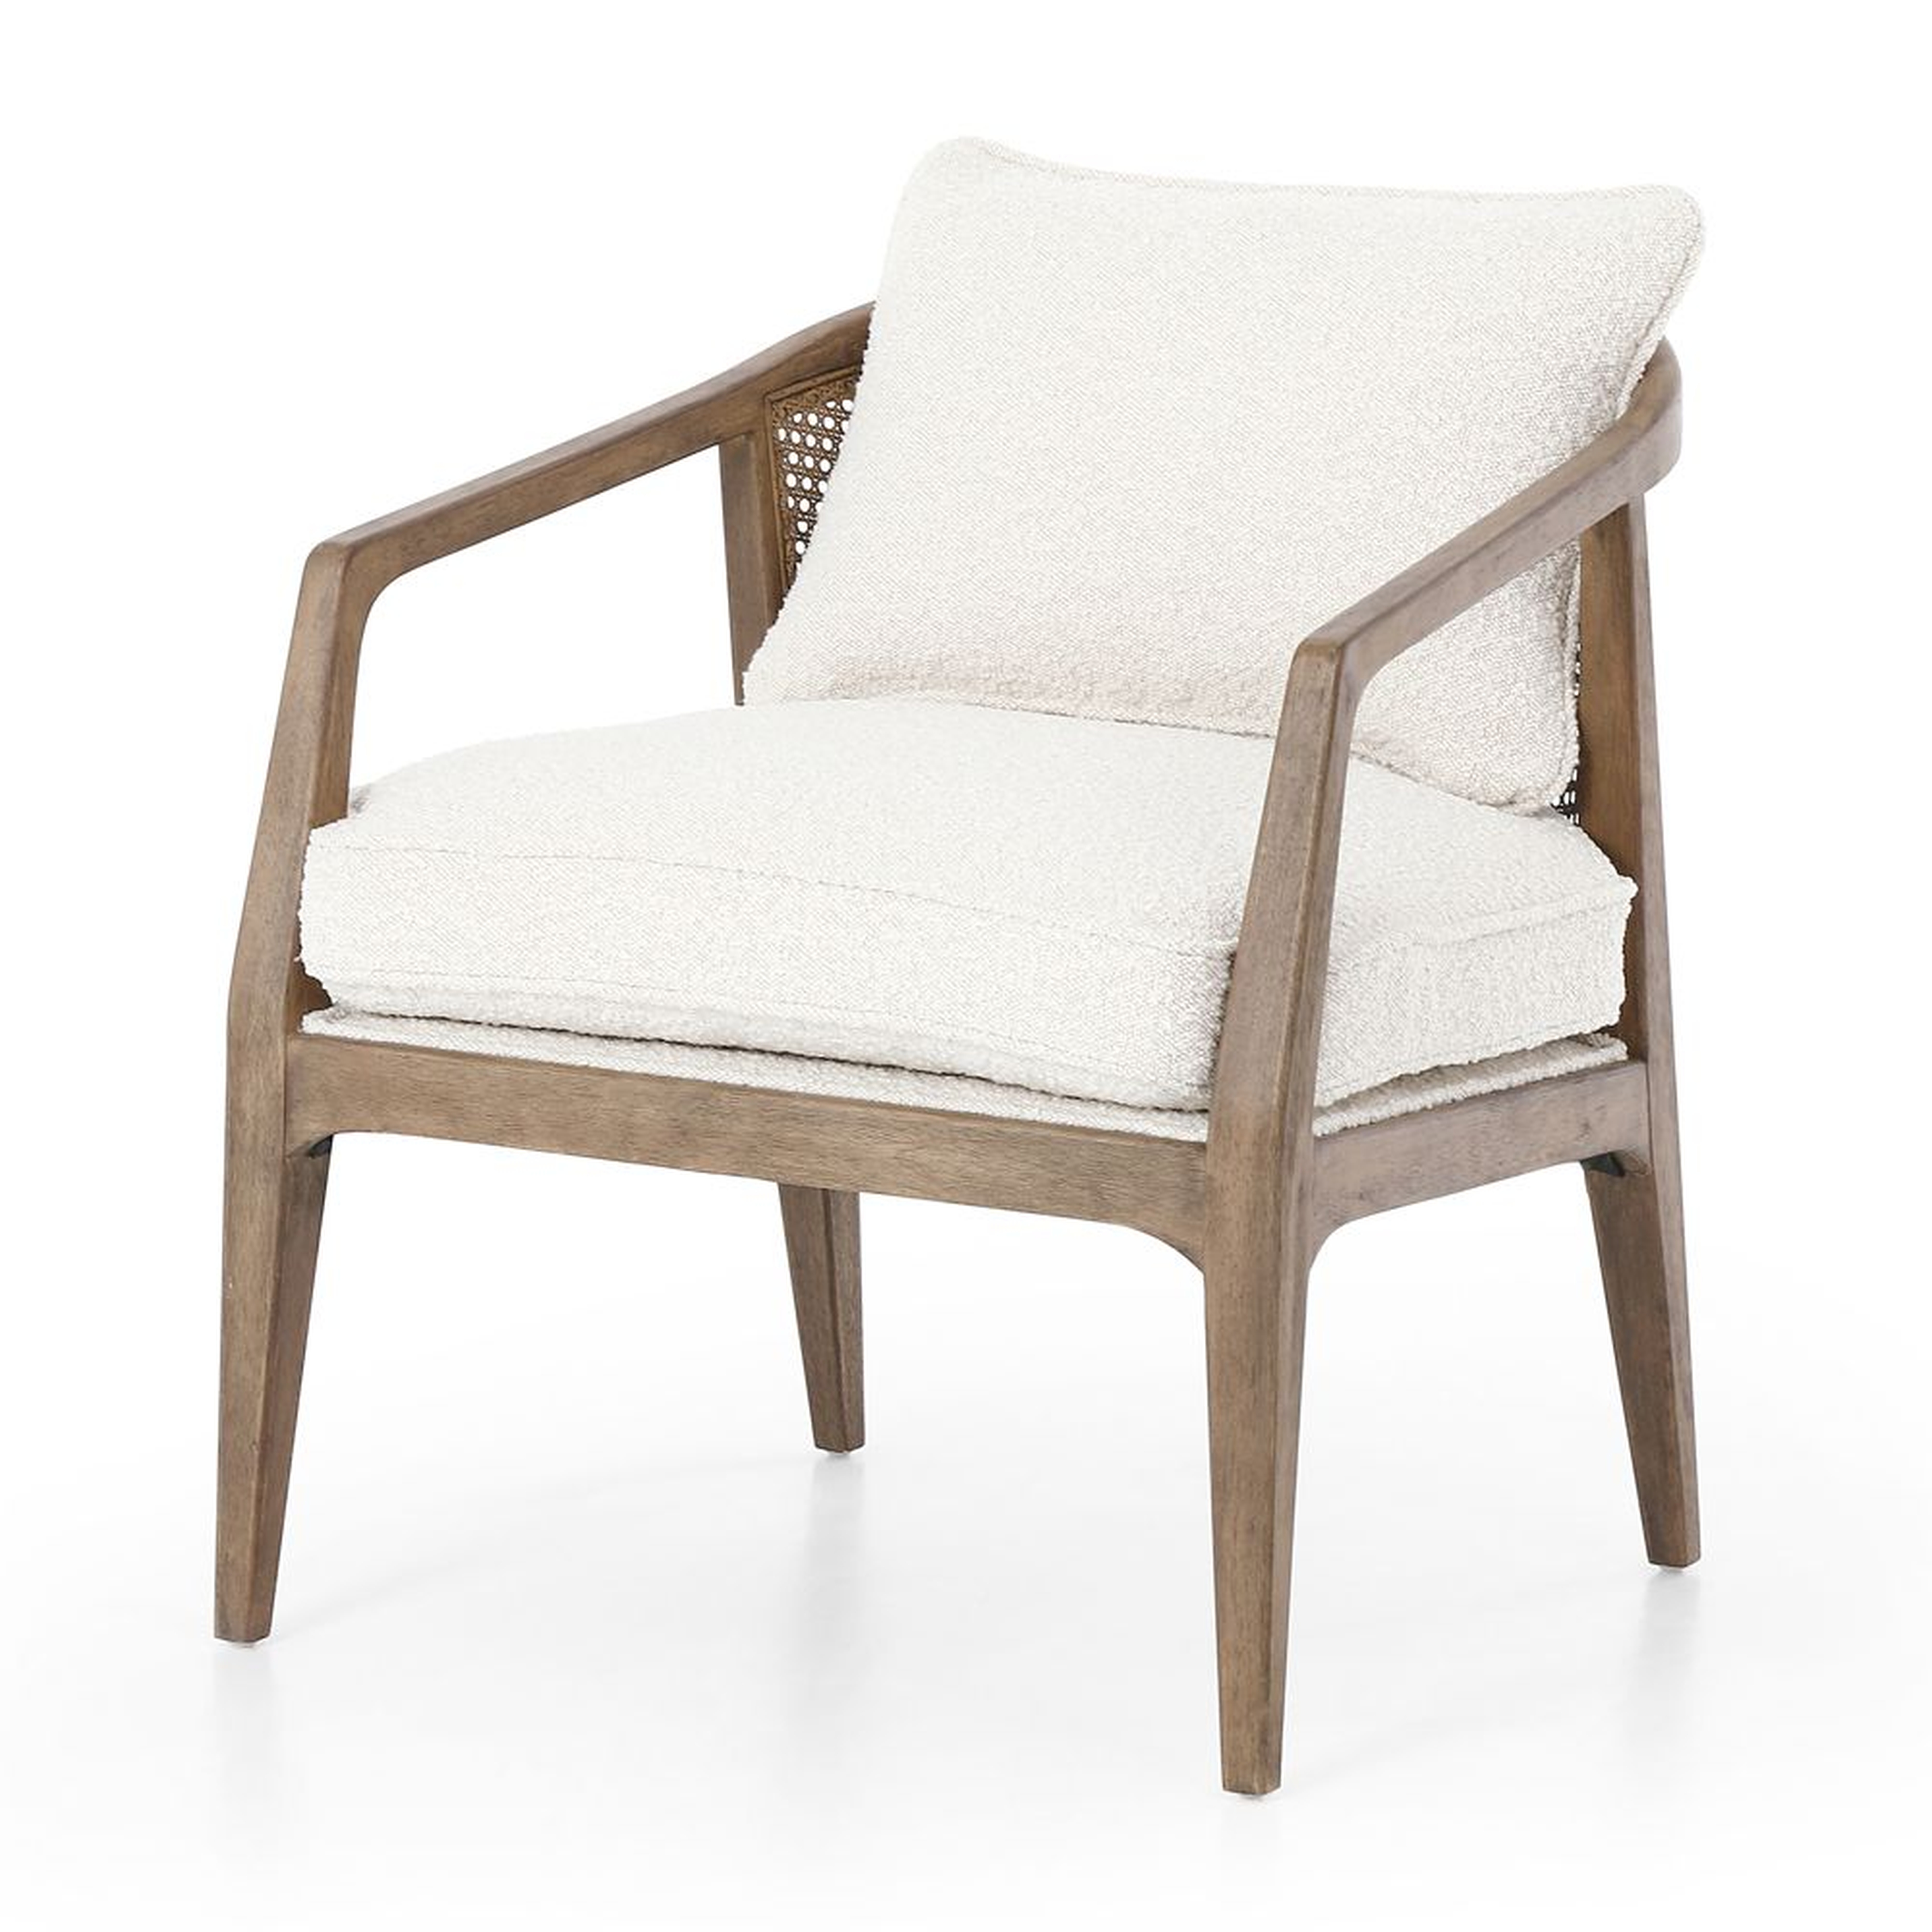 Audra Rattan Back Chair - Crate and Barrel